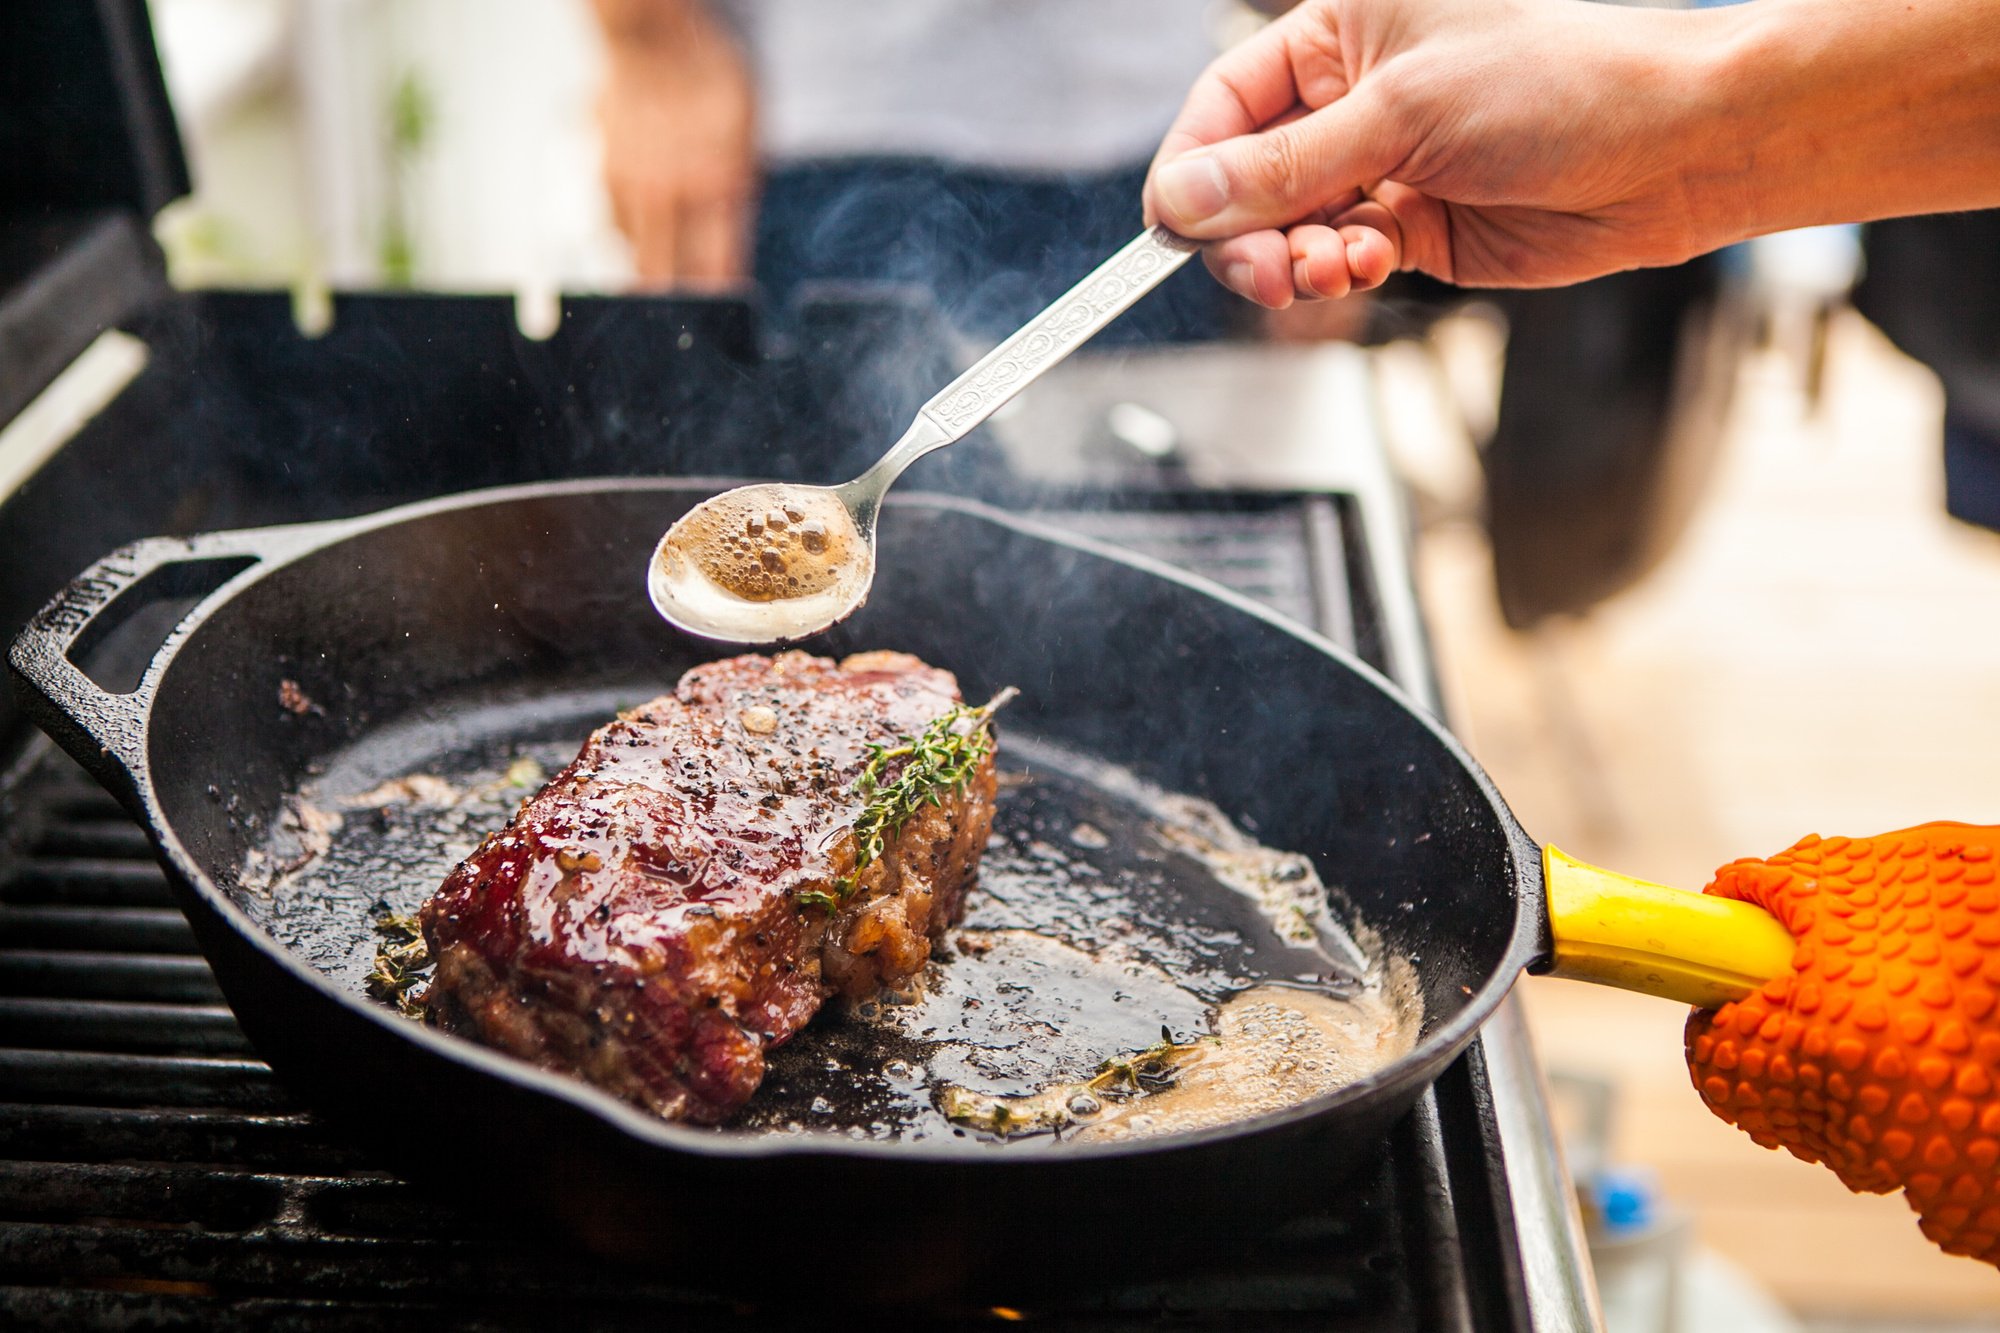 5 Rules You Need to Follow to Cook the Perfect Steak